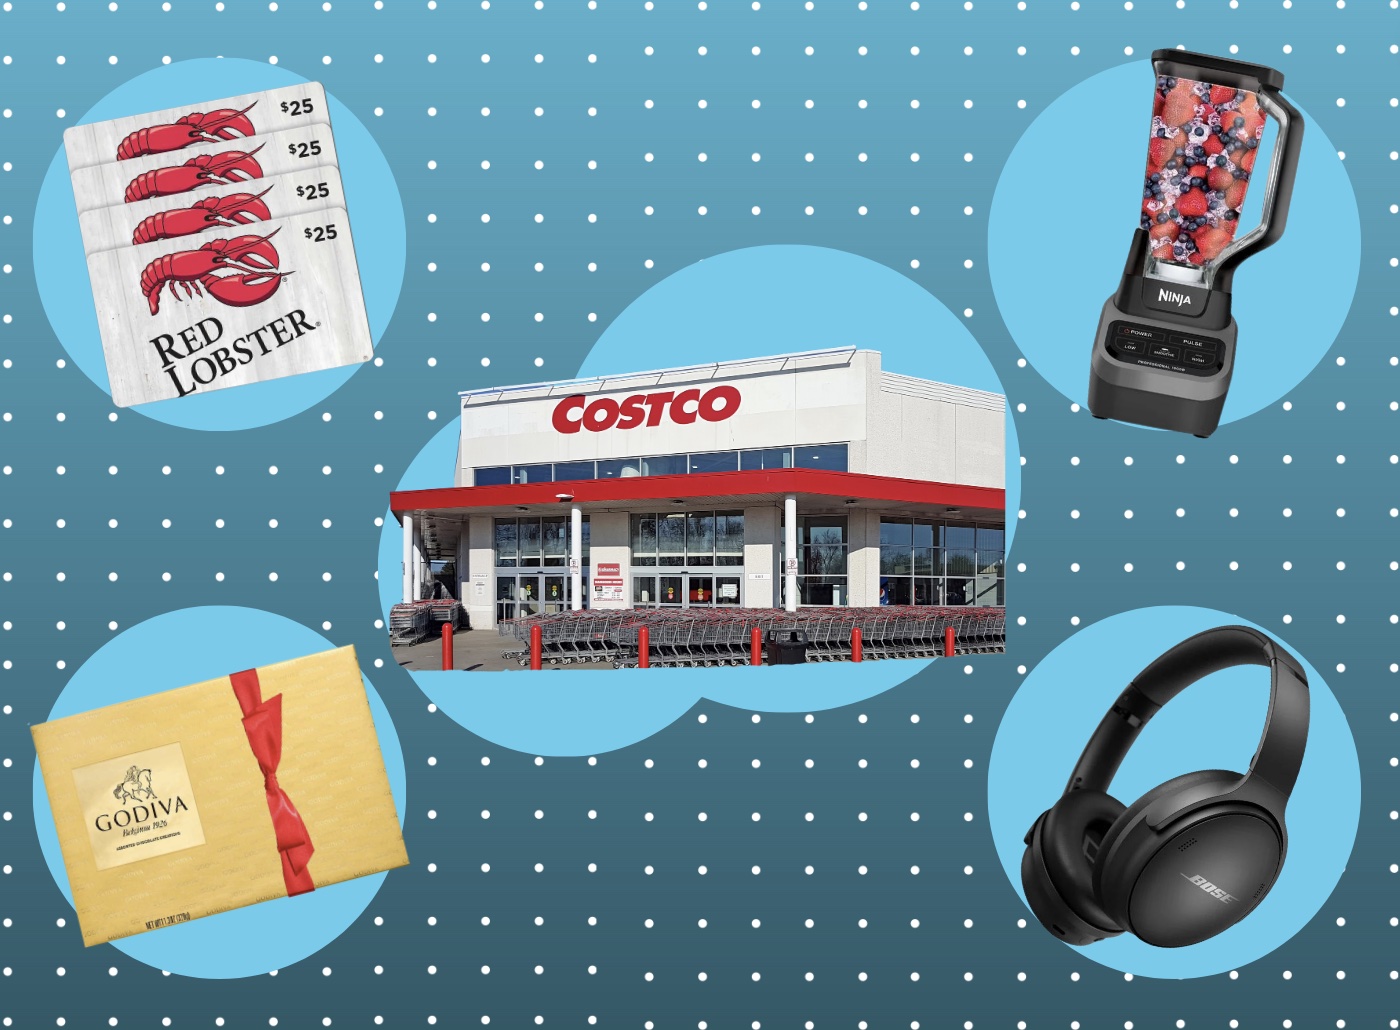 The 20 Best Costco Black Friday Deals You Won't Want to Miss